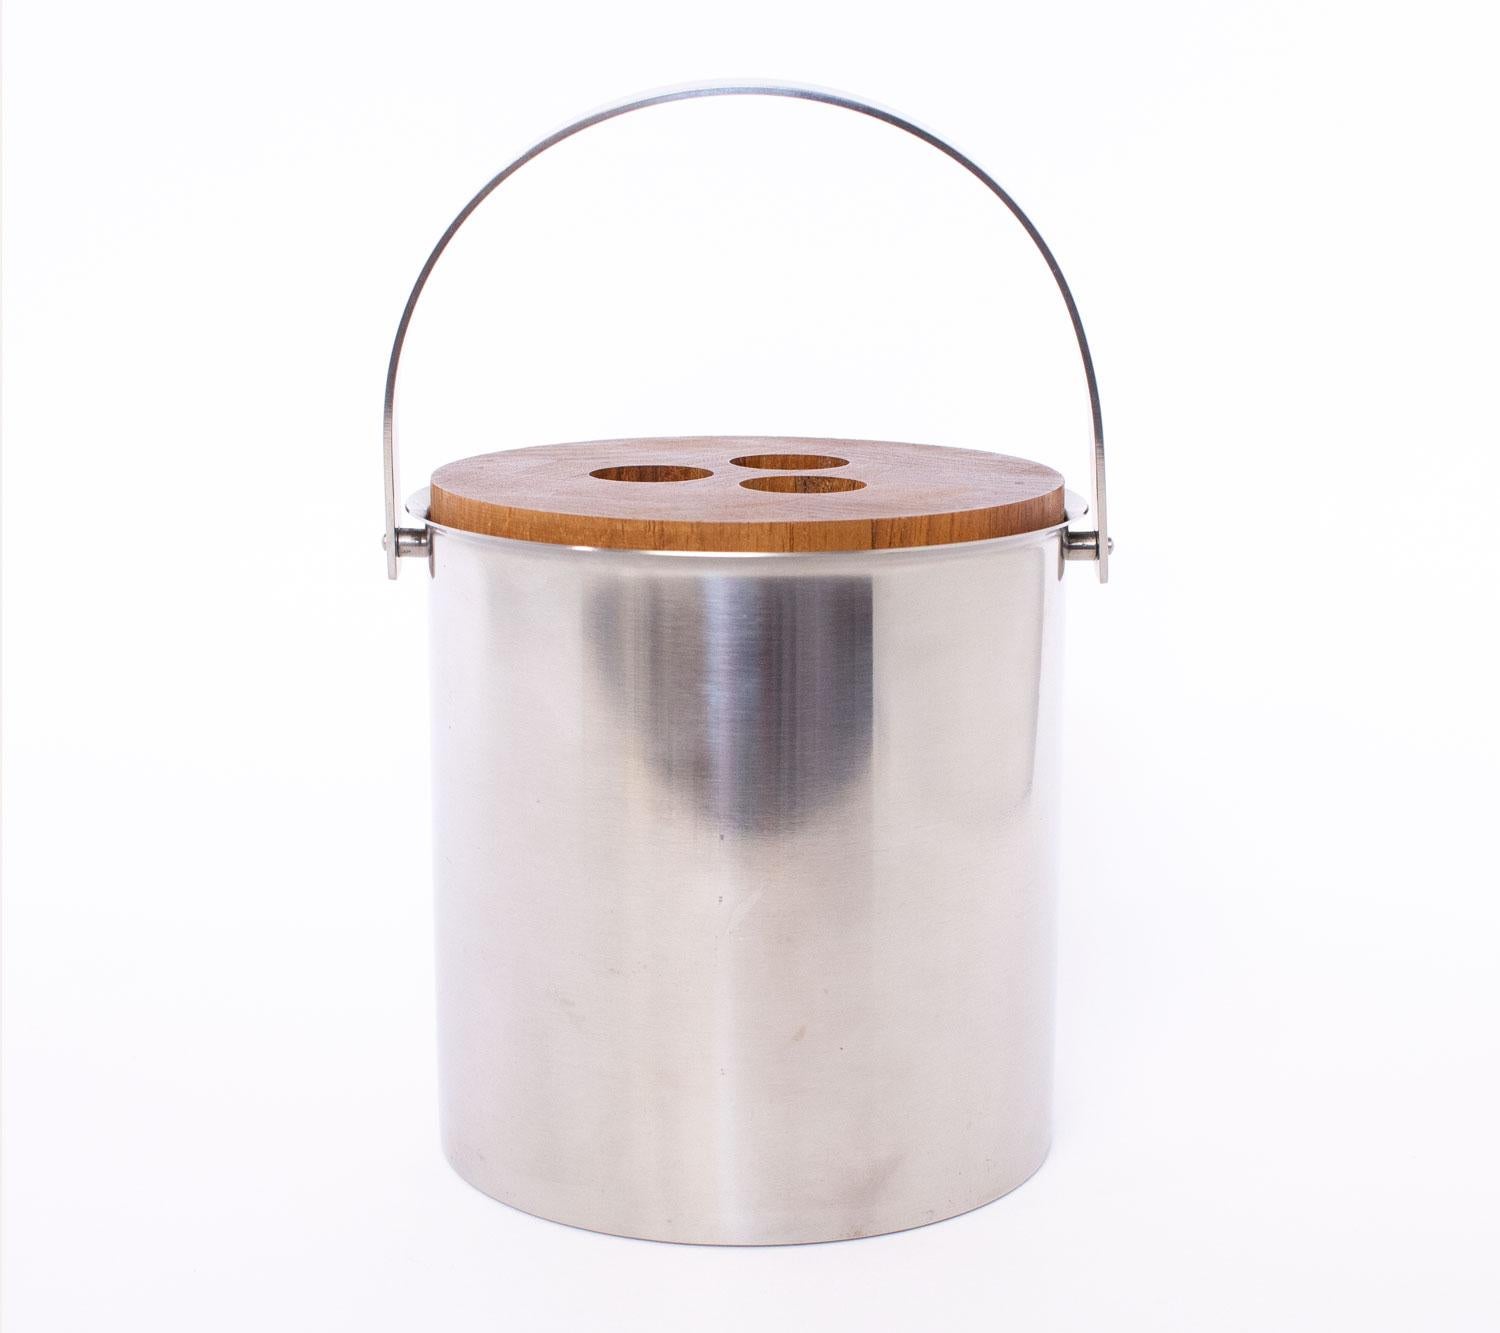 1960s Danish  ice bucket designed by Arne Jacobsen for Stelton.  The round stainless steel bucket contains a black plastic liner and it has teak lid with distinctive bowling ball style handles.